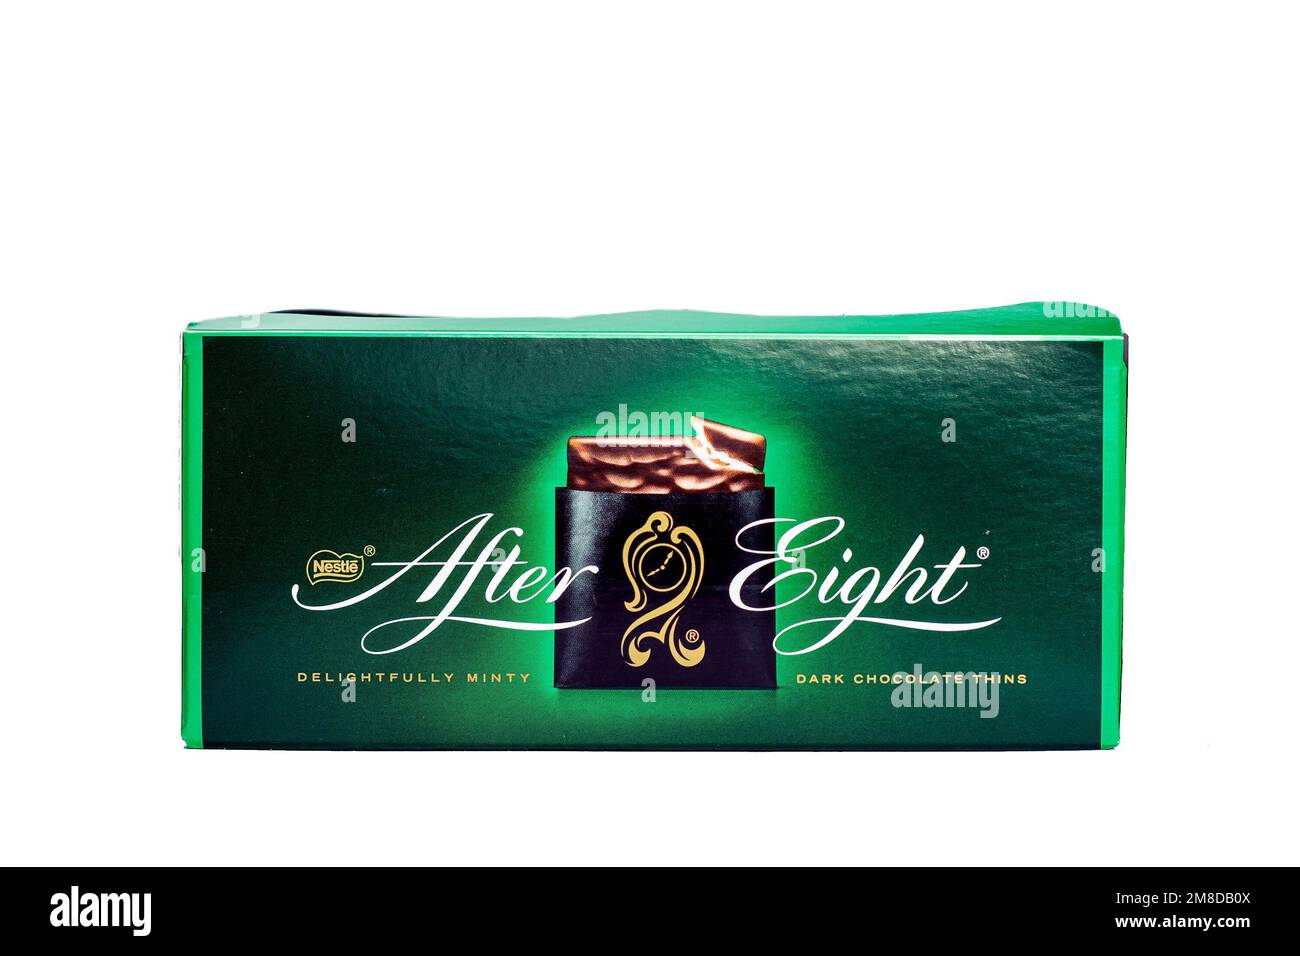 DUSHANBE, TAJIKISTAN - SEPTEMBER 12, 2022: Green box package of mint dark chocolate thins After Eight isolated on white background close up. Stock Photo